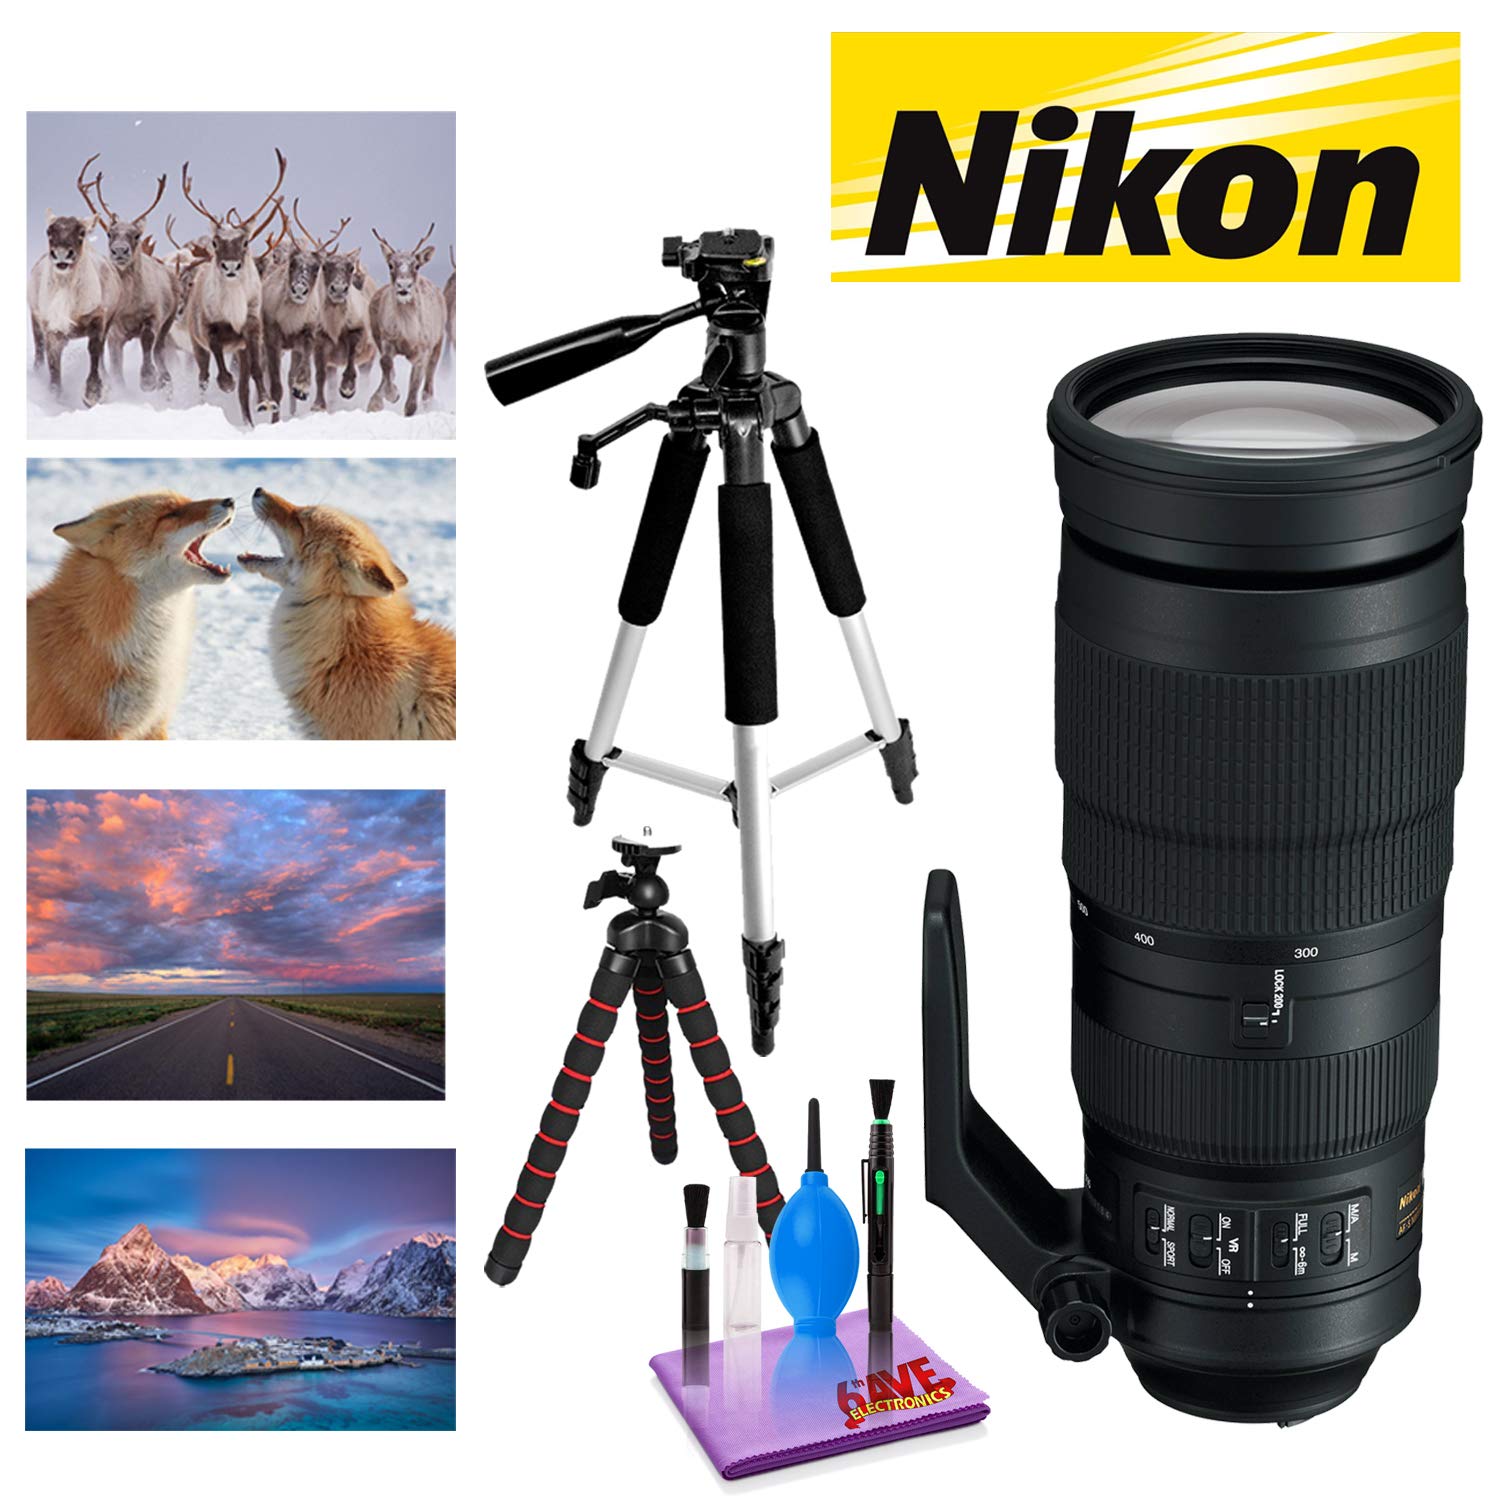 Nikon AF-S NIKKOR 200-500mm f/5.6E ED VR Lens with 12 in Flexible Tripod and 72 in Professional Heavy Aluminum Tripod